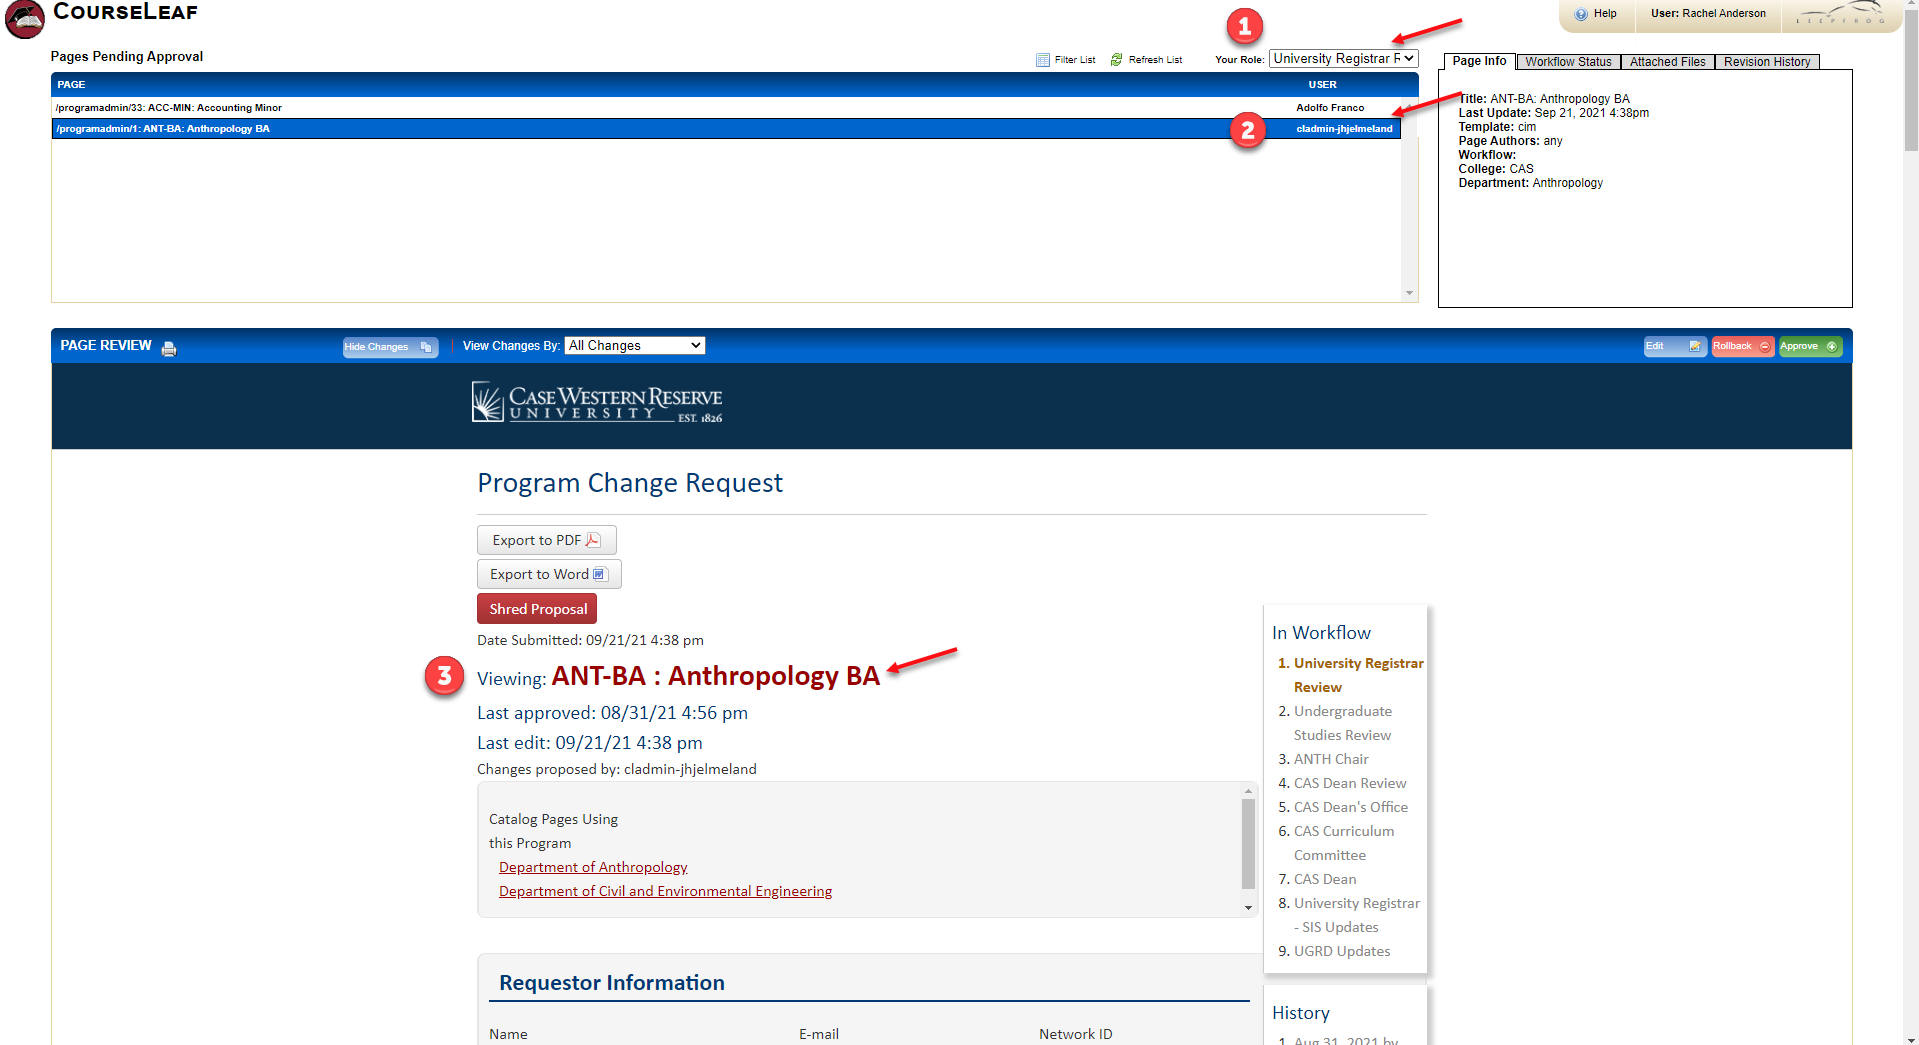 Screenshot of Anthropology BA with red arrows pointing to the "Your Role" drop down, the pages pending approval and the page viewing area.